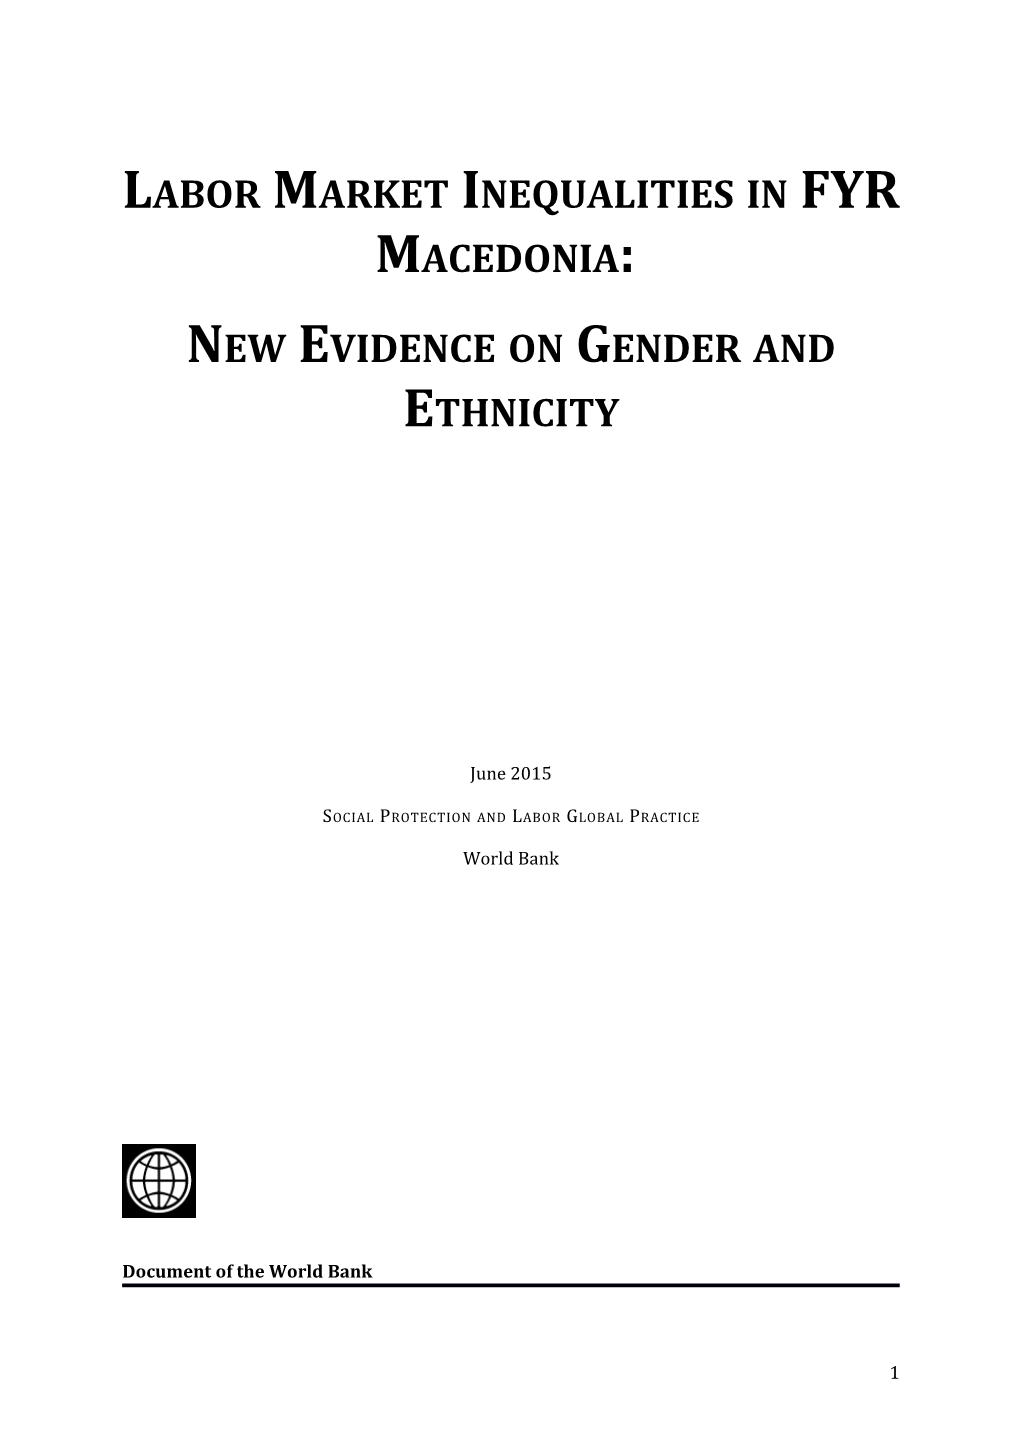 New Evidence on Gender and Ethnicity